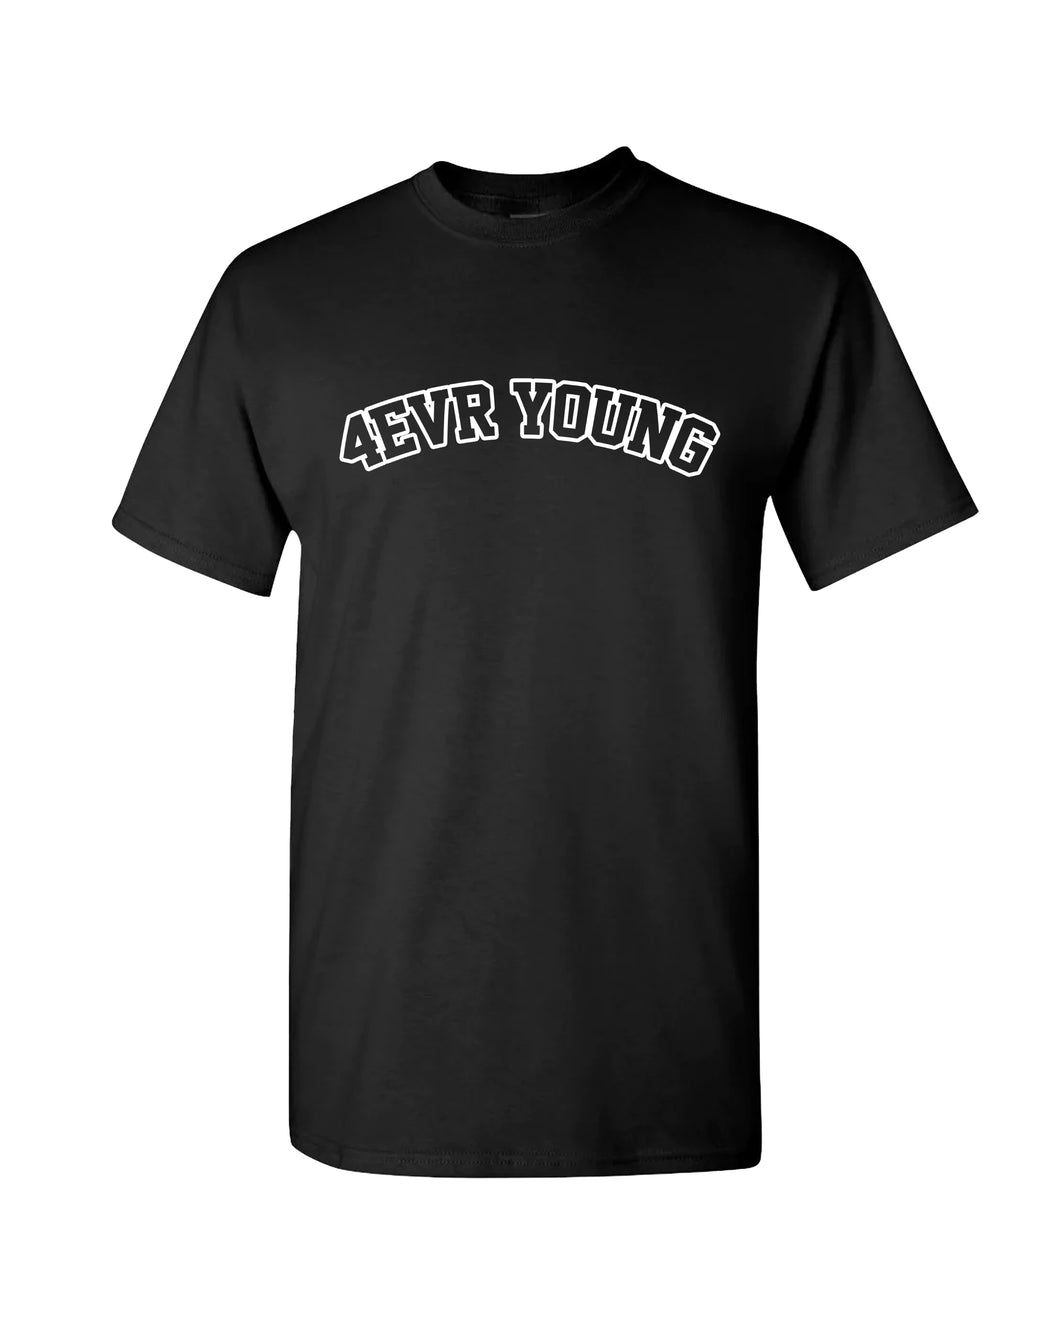 4EVR YOUNG University Black Tee